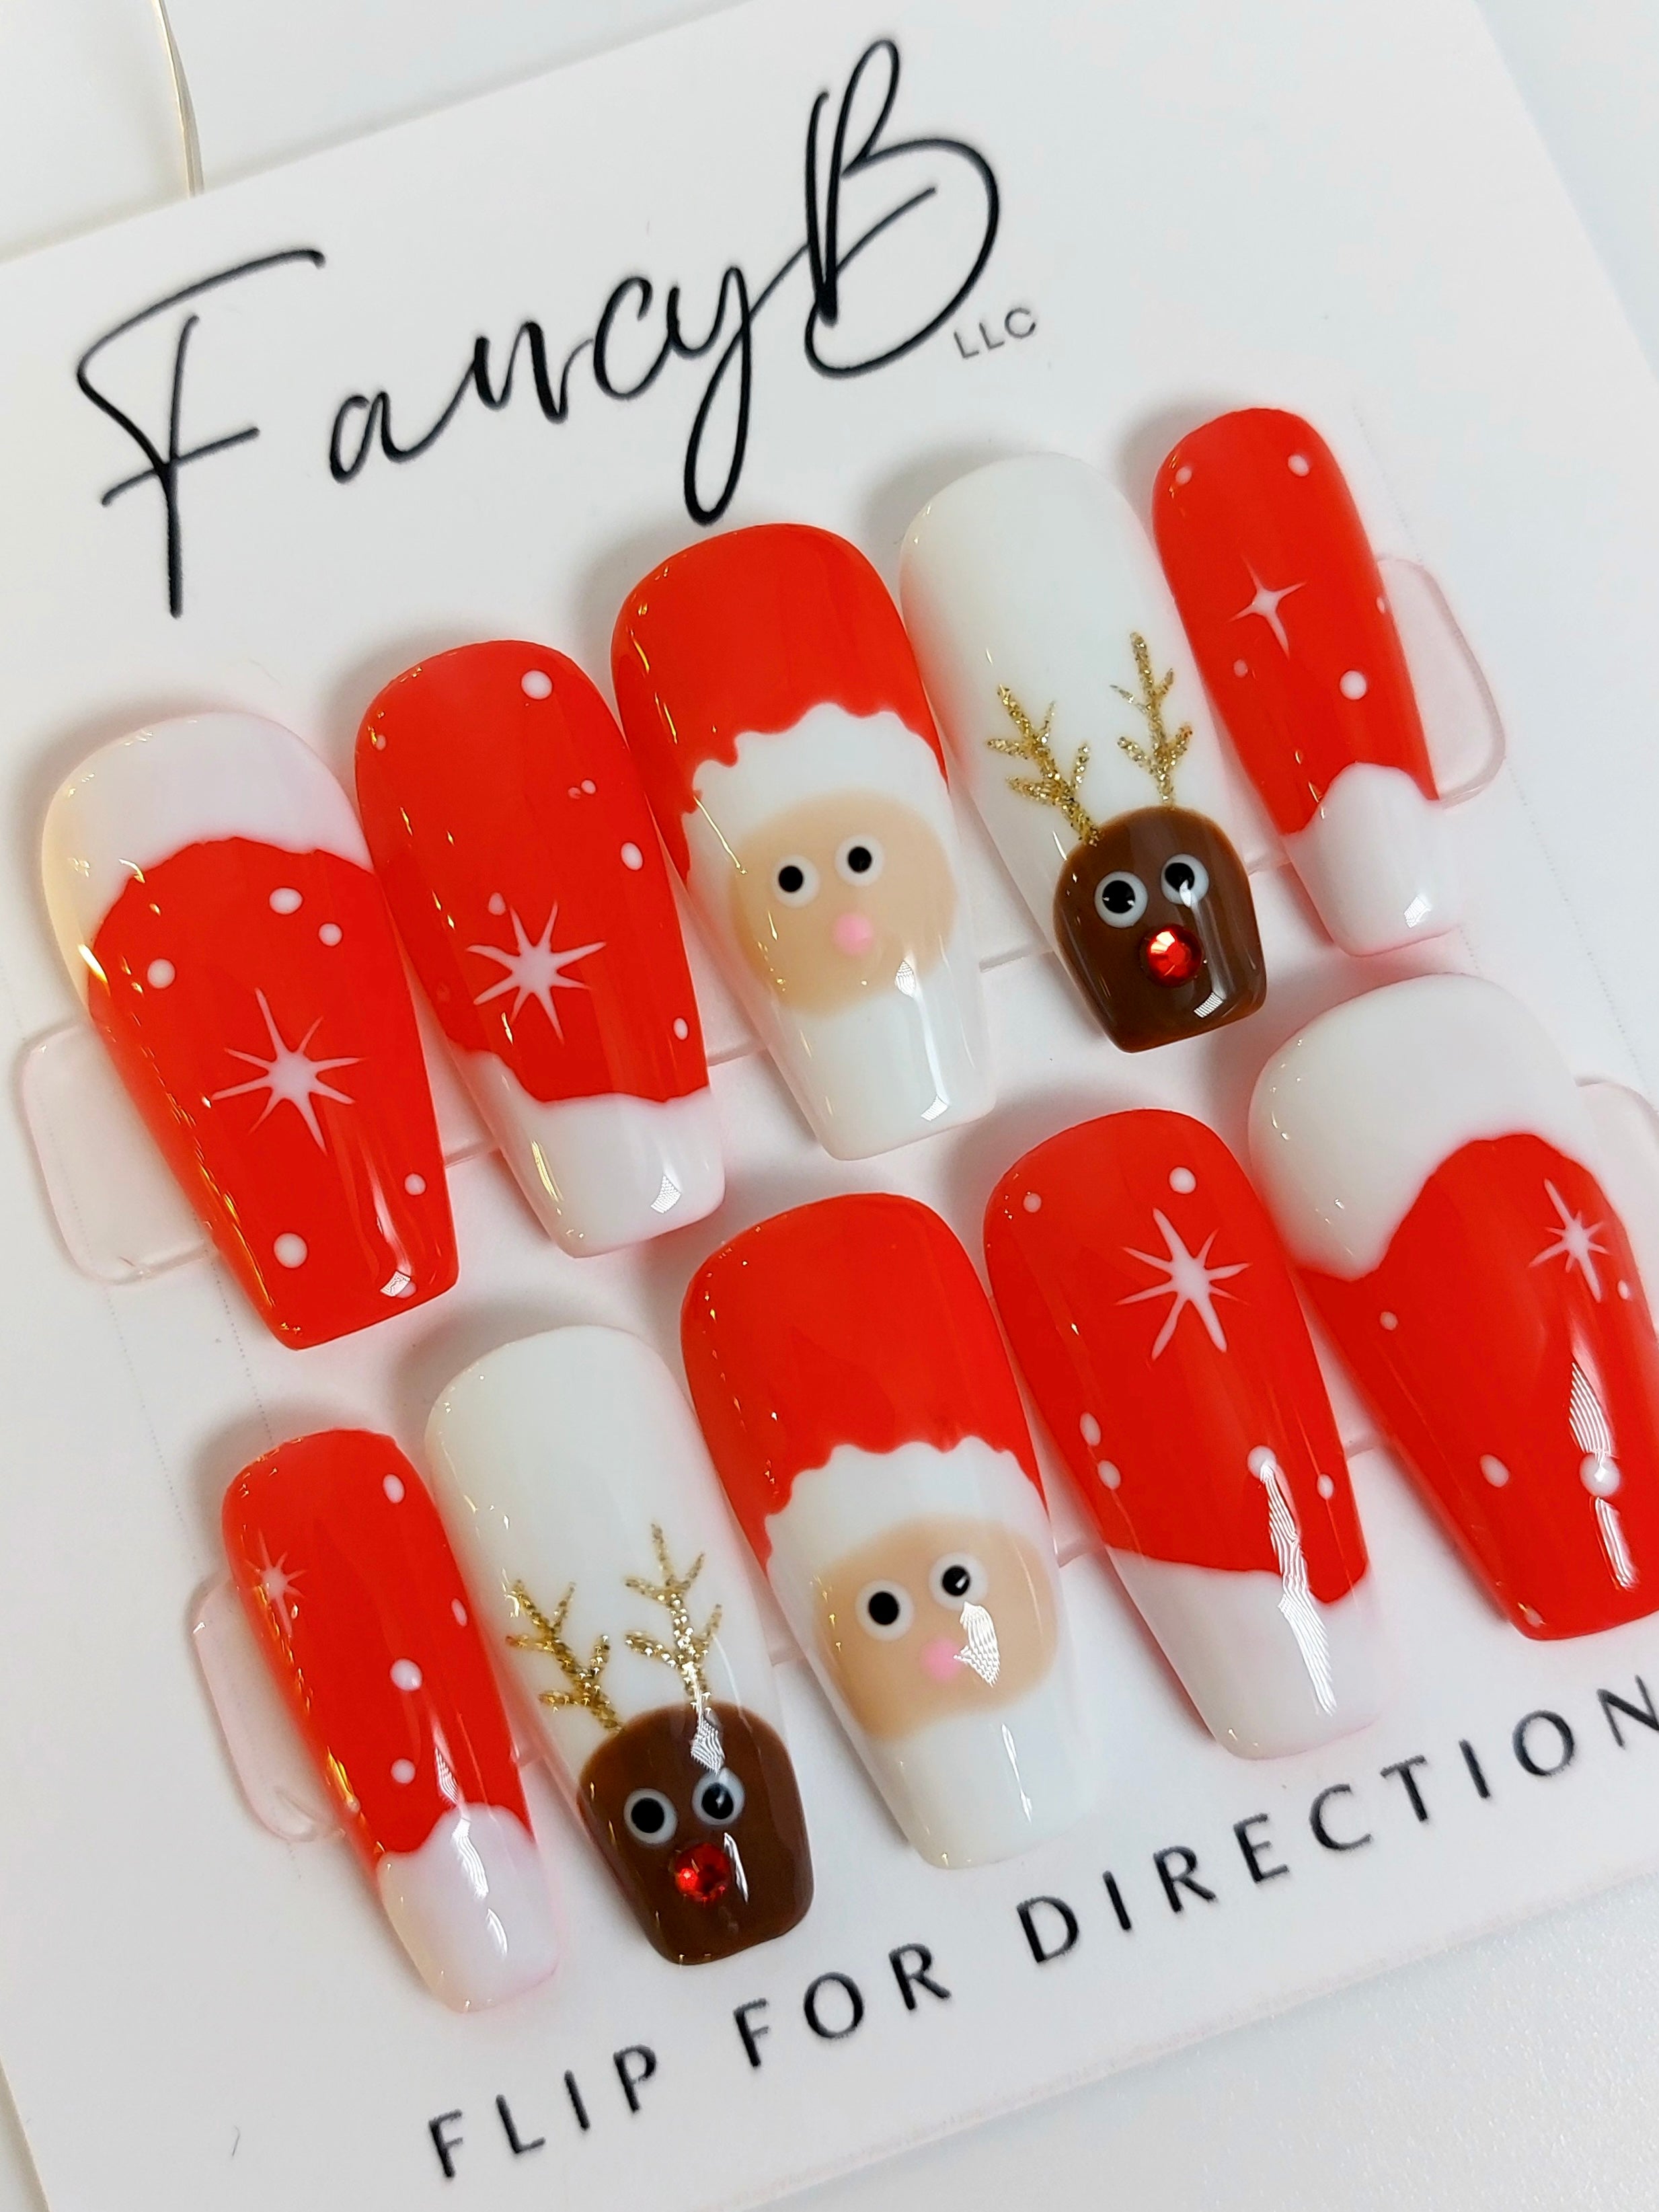 Custom Christmas Press on Nails, reindeer and santa accents with red background and snow designs. FancyB Nails.